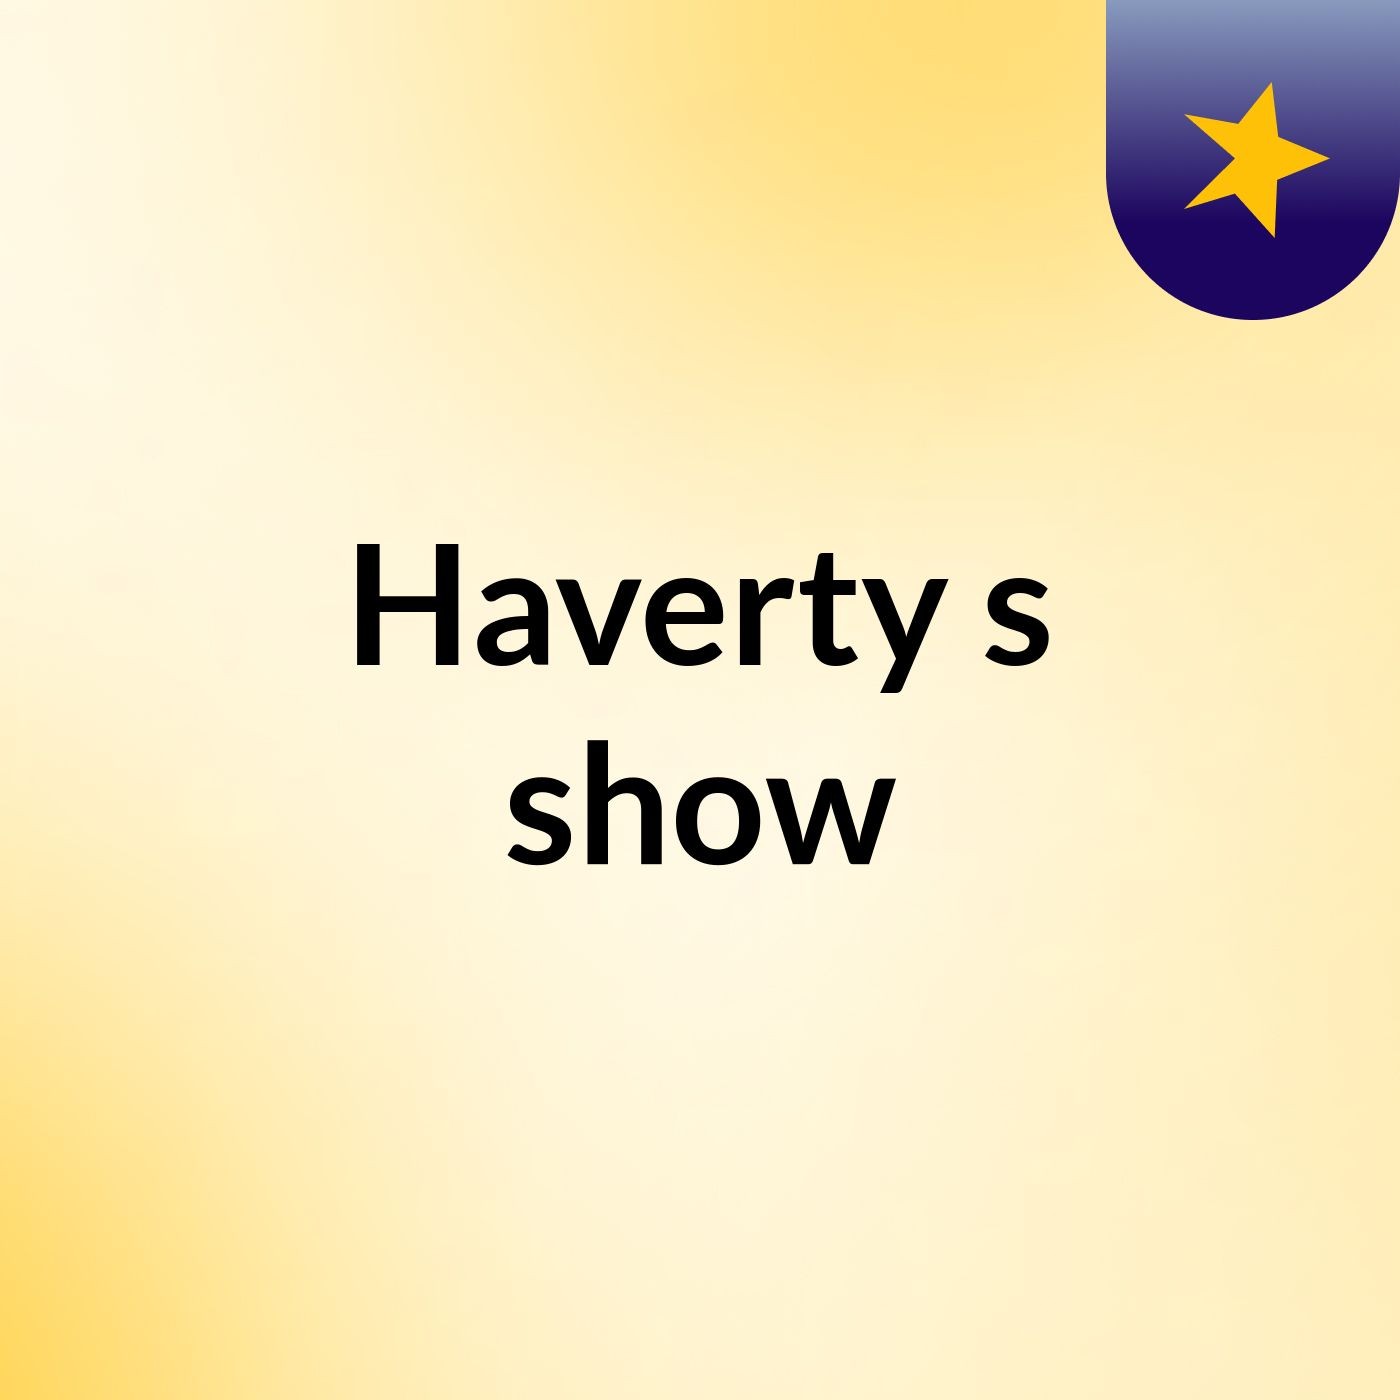 Haverty's show